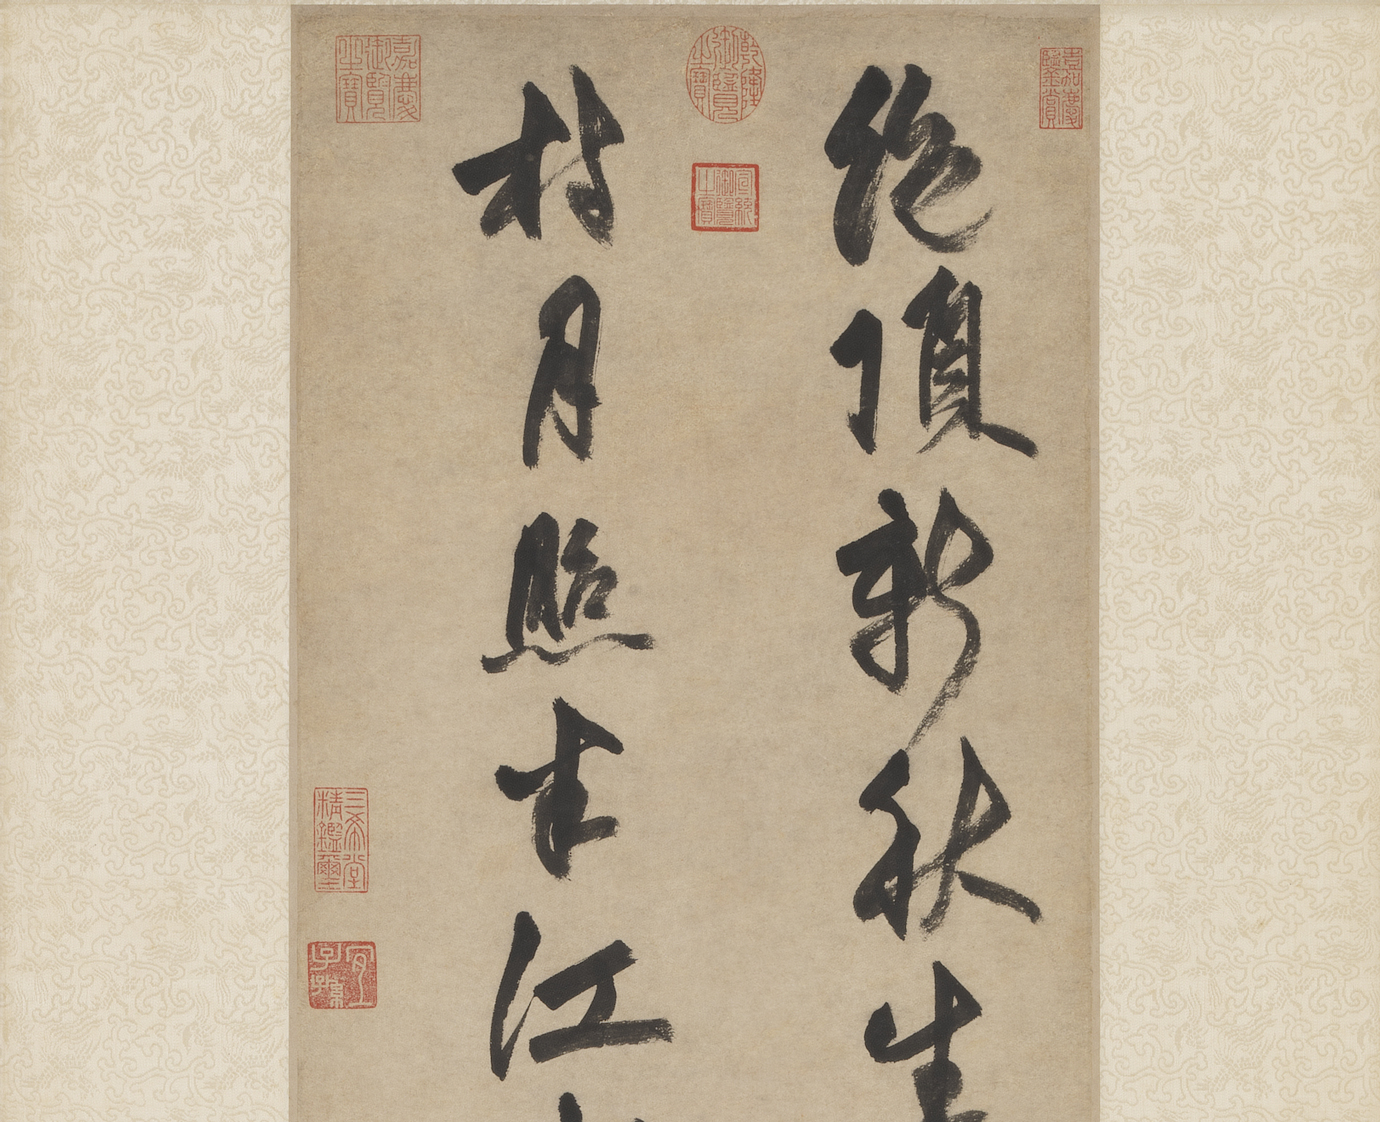 Truncated Verse by a Tang Poet